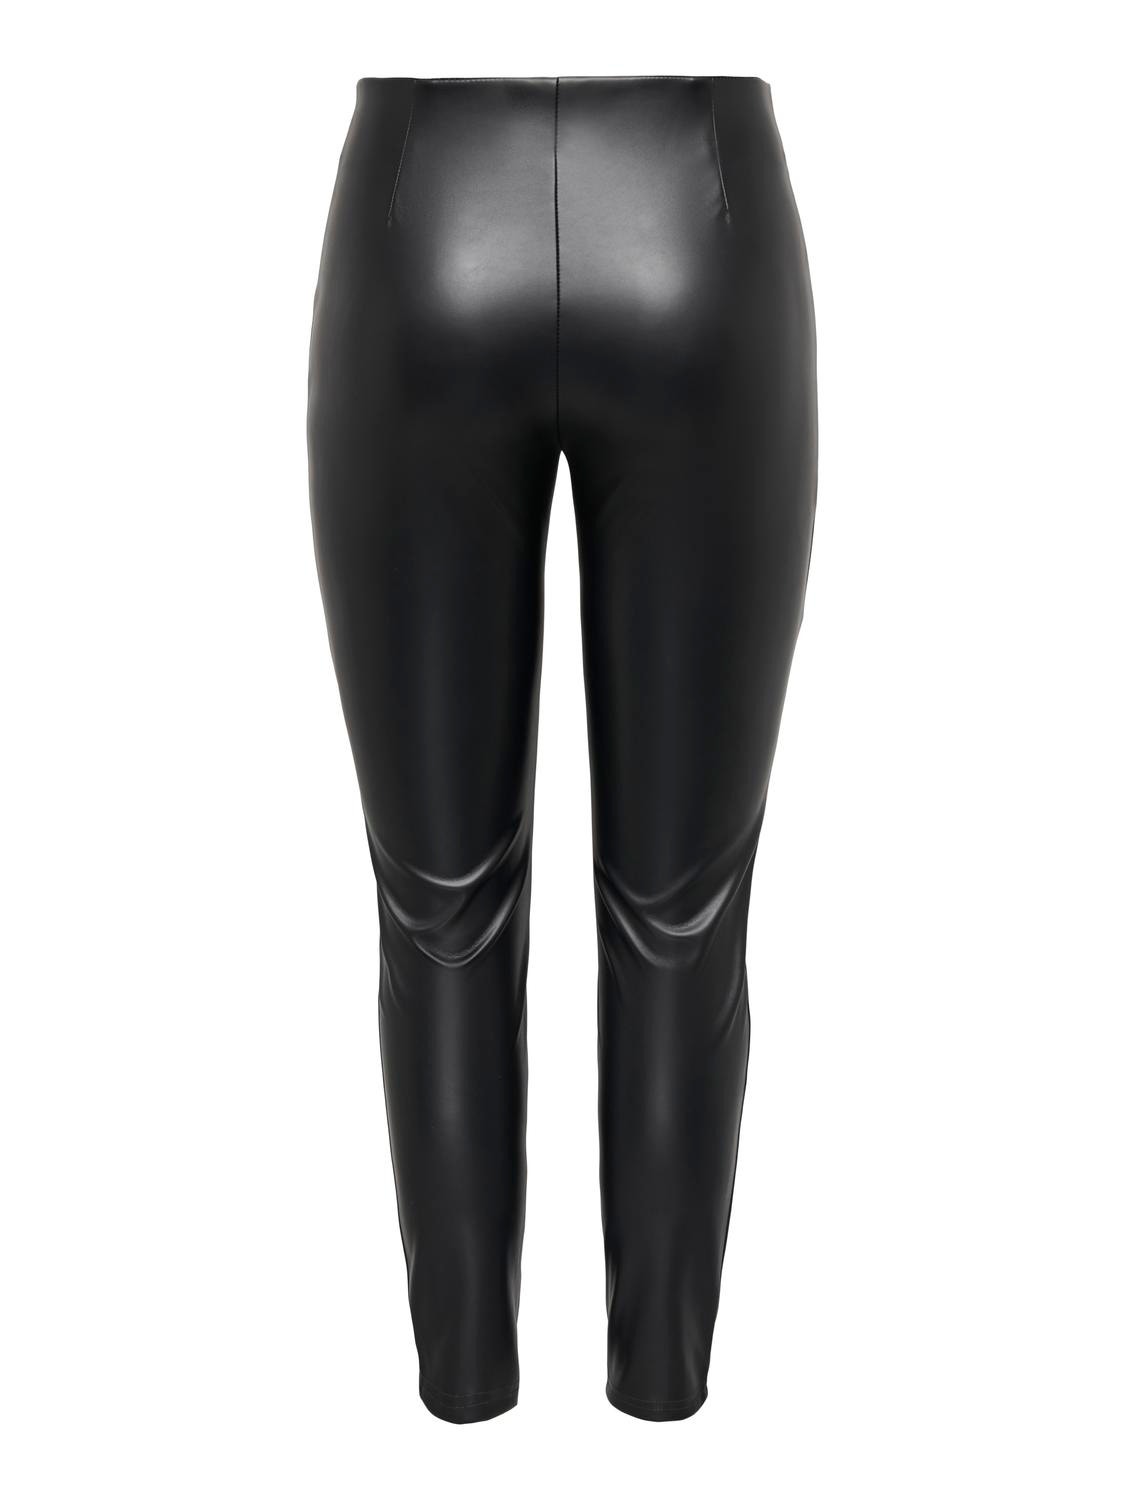 ONLY Tight Fit High waist Fitted hems Leggings -Black - 15300607